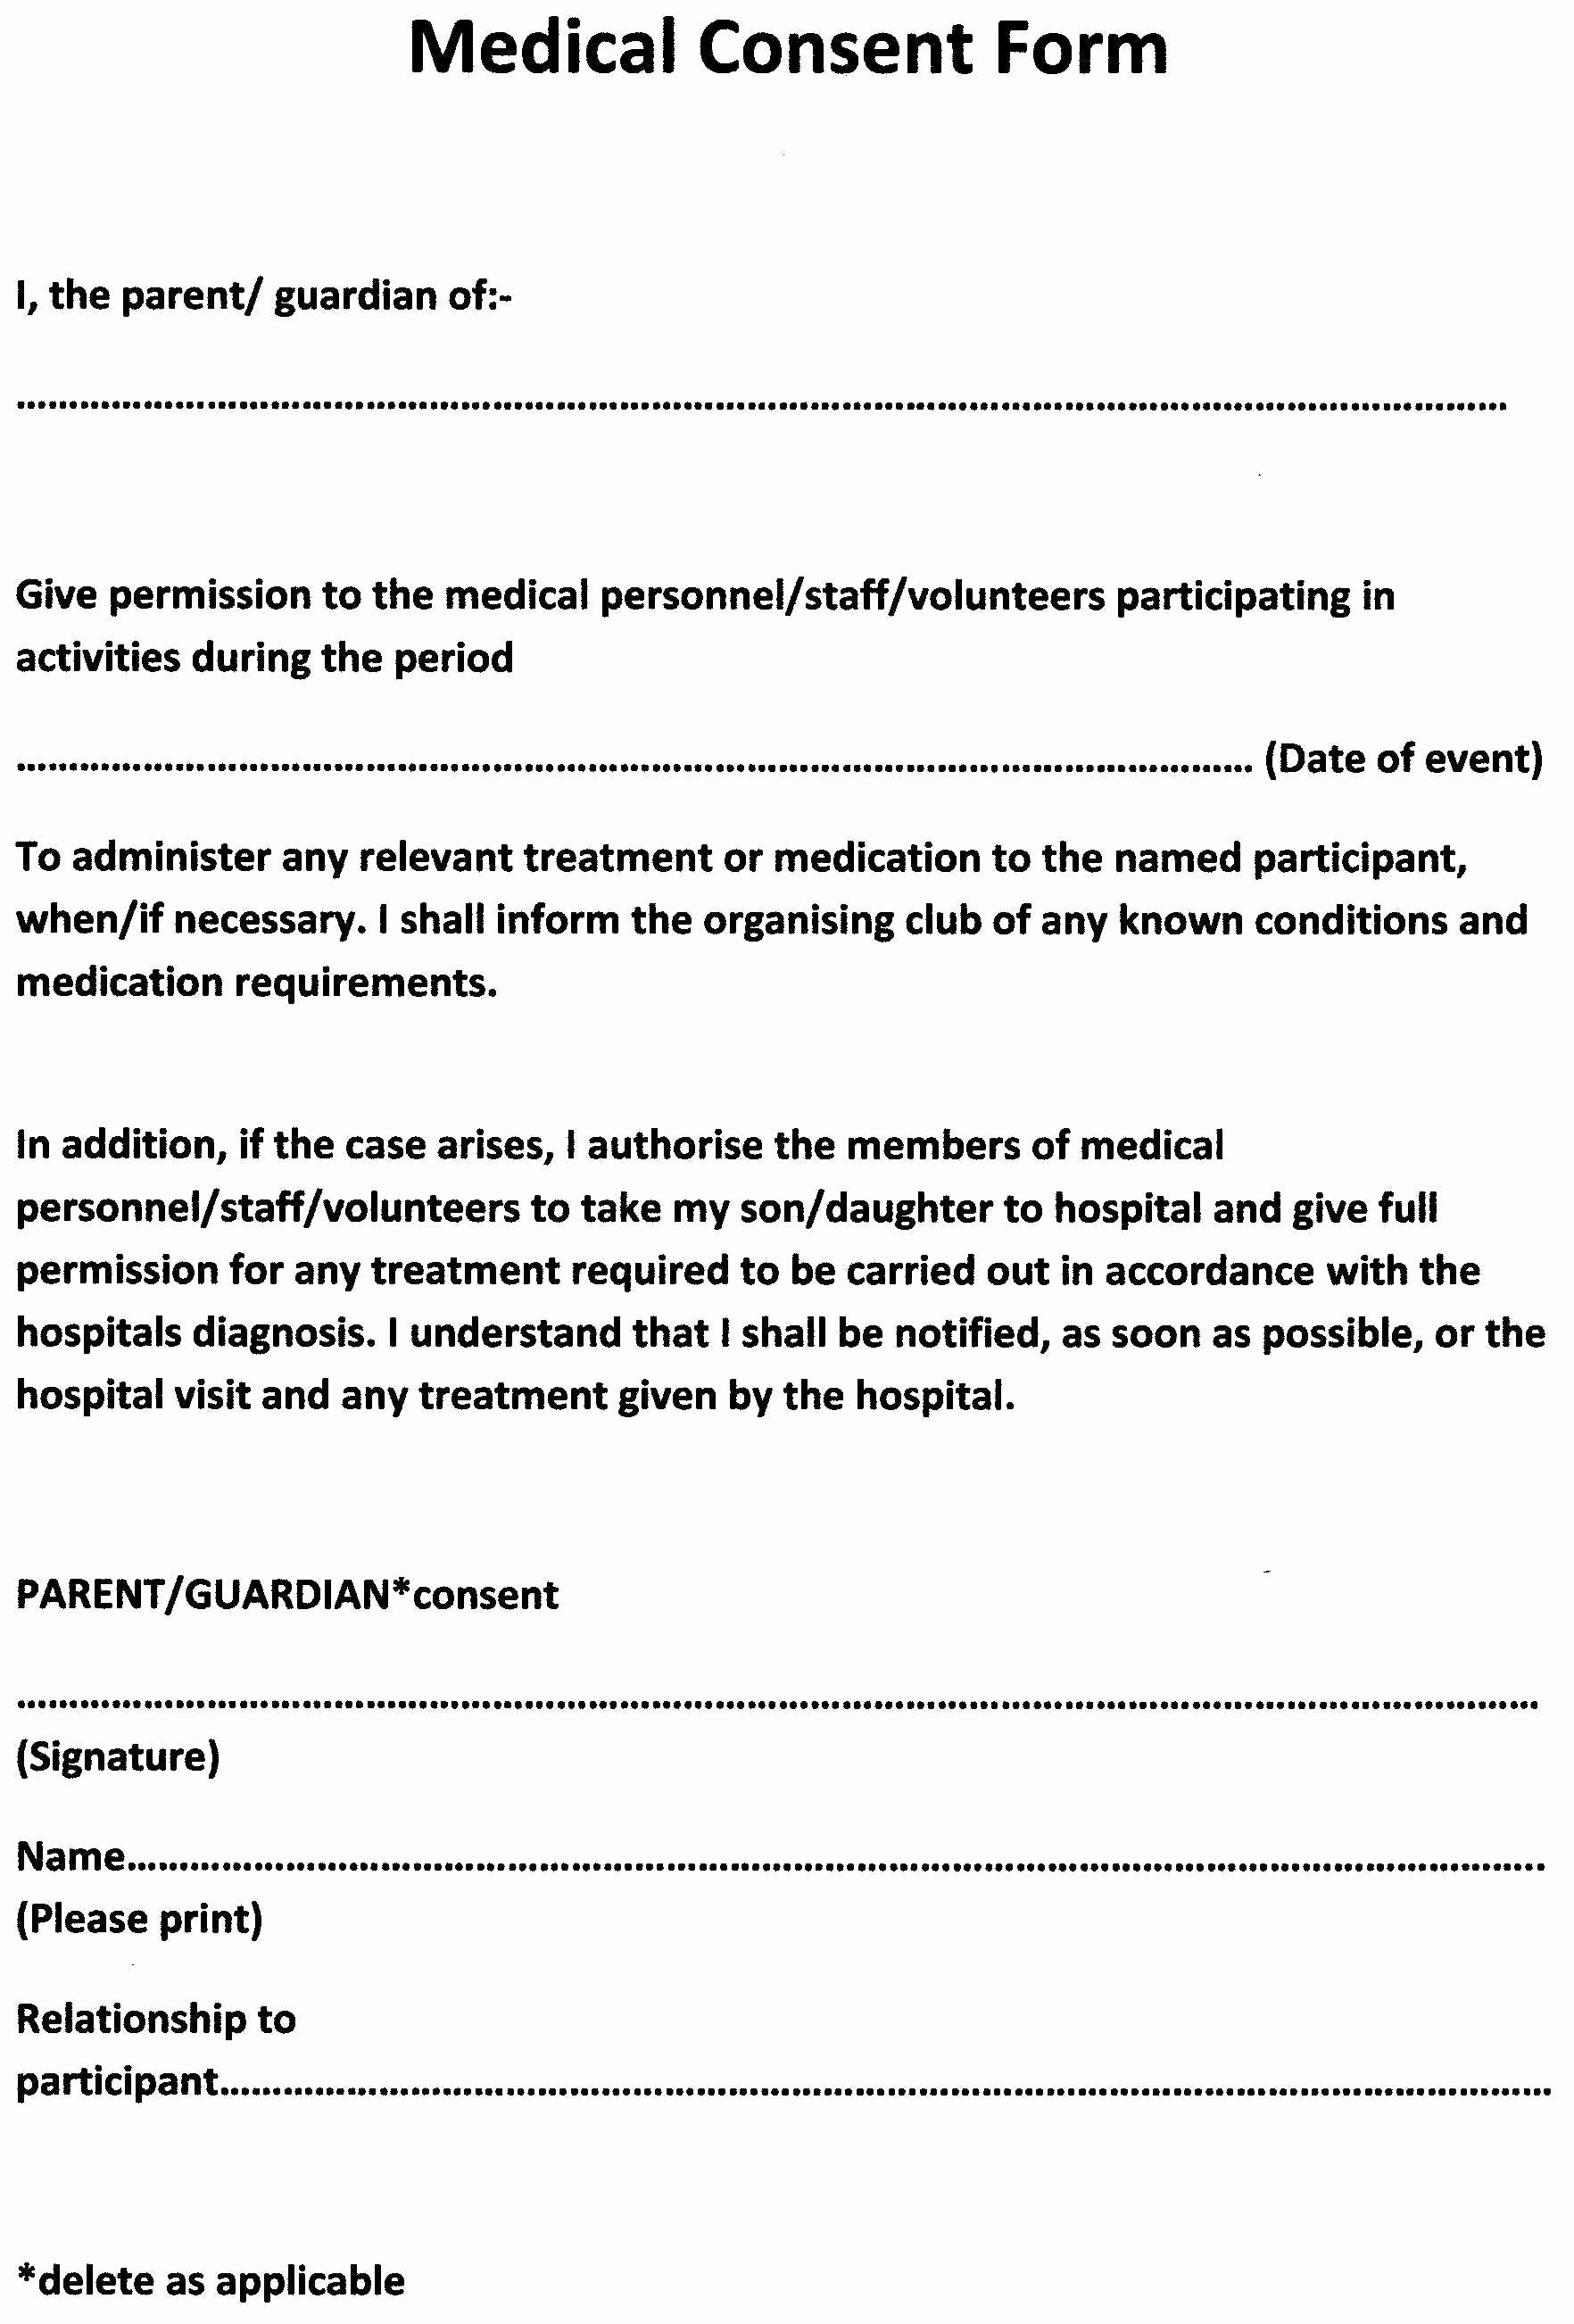 Medical Consent form Template Lovely Medical Consent form Medical Consent form